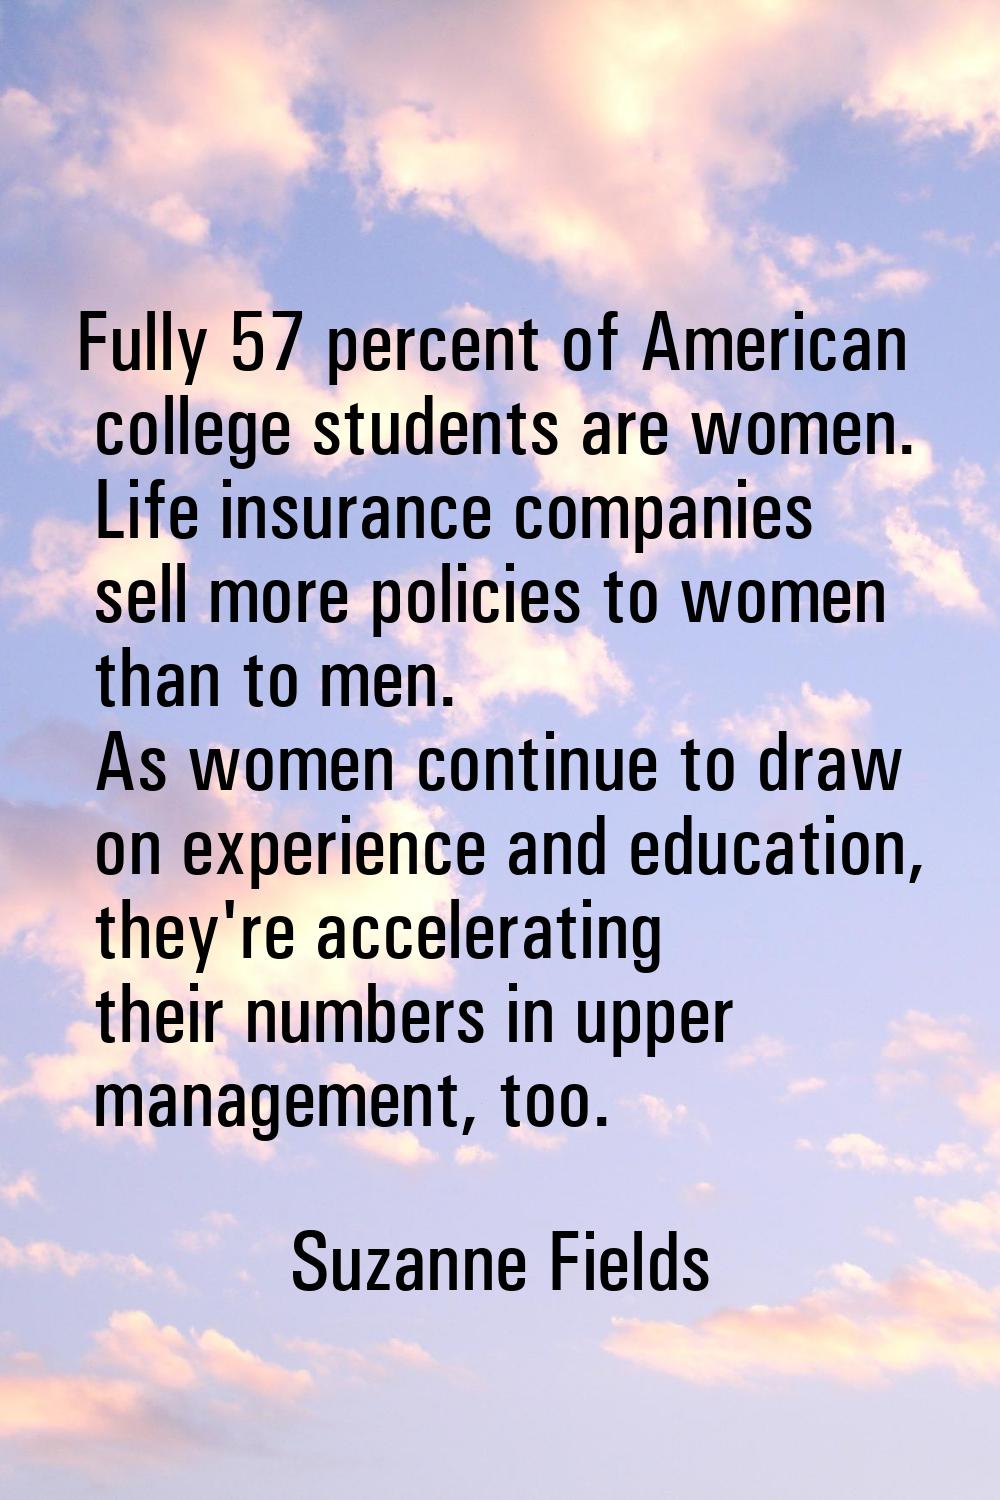 Fully 57 percent of American college students are women. Life insurance companies sell more policie